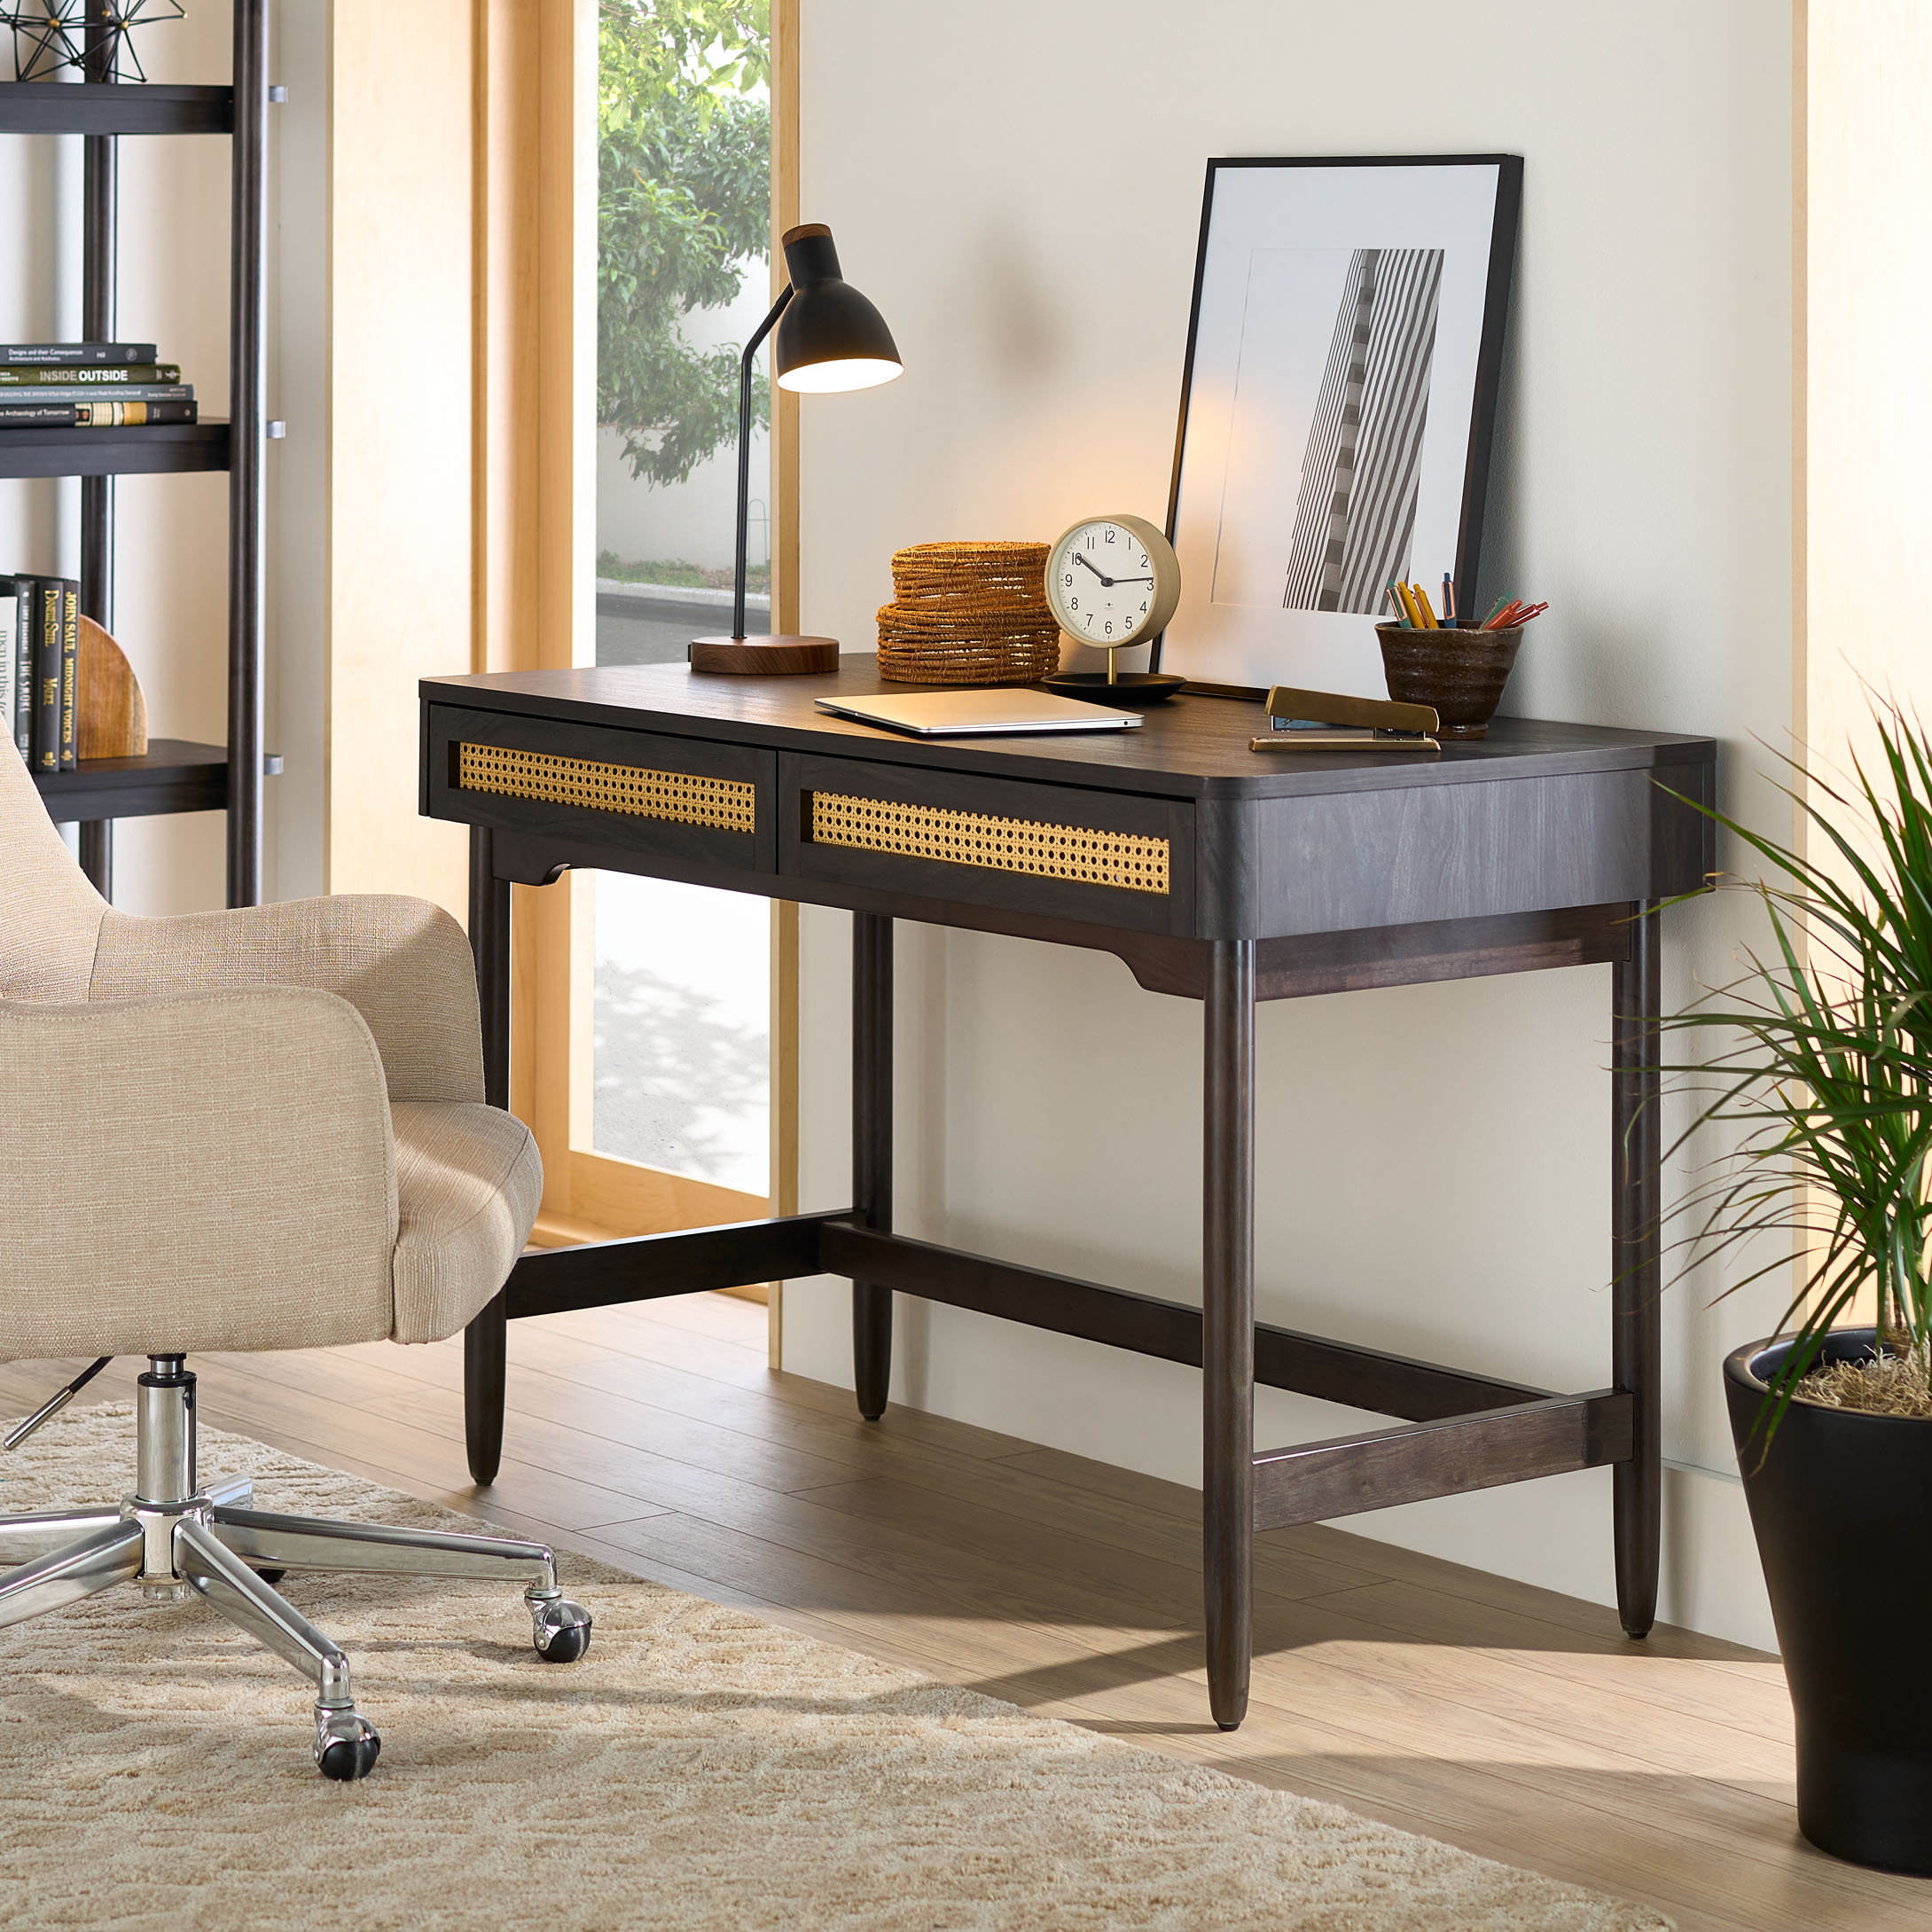 Better Homes & Gardens Springwood Caning Desk, Charcoal Finish - image 1 of 12